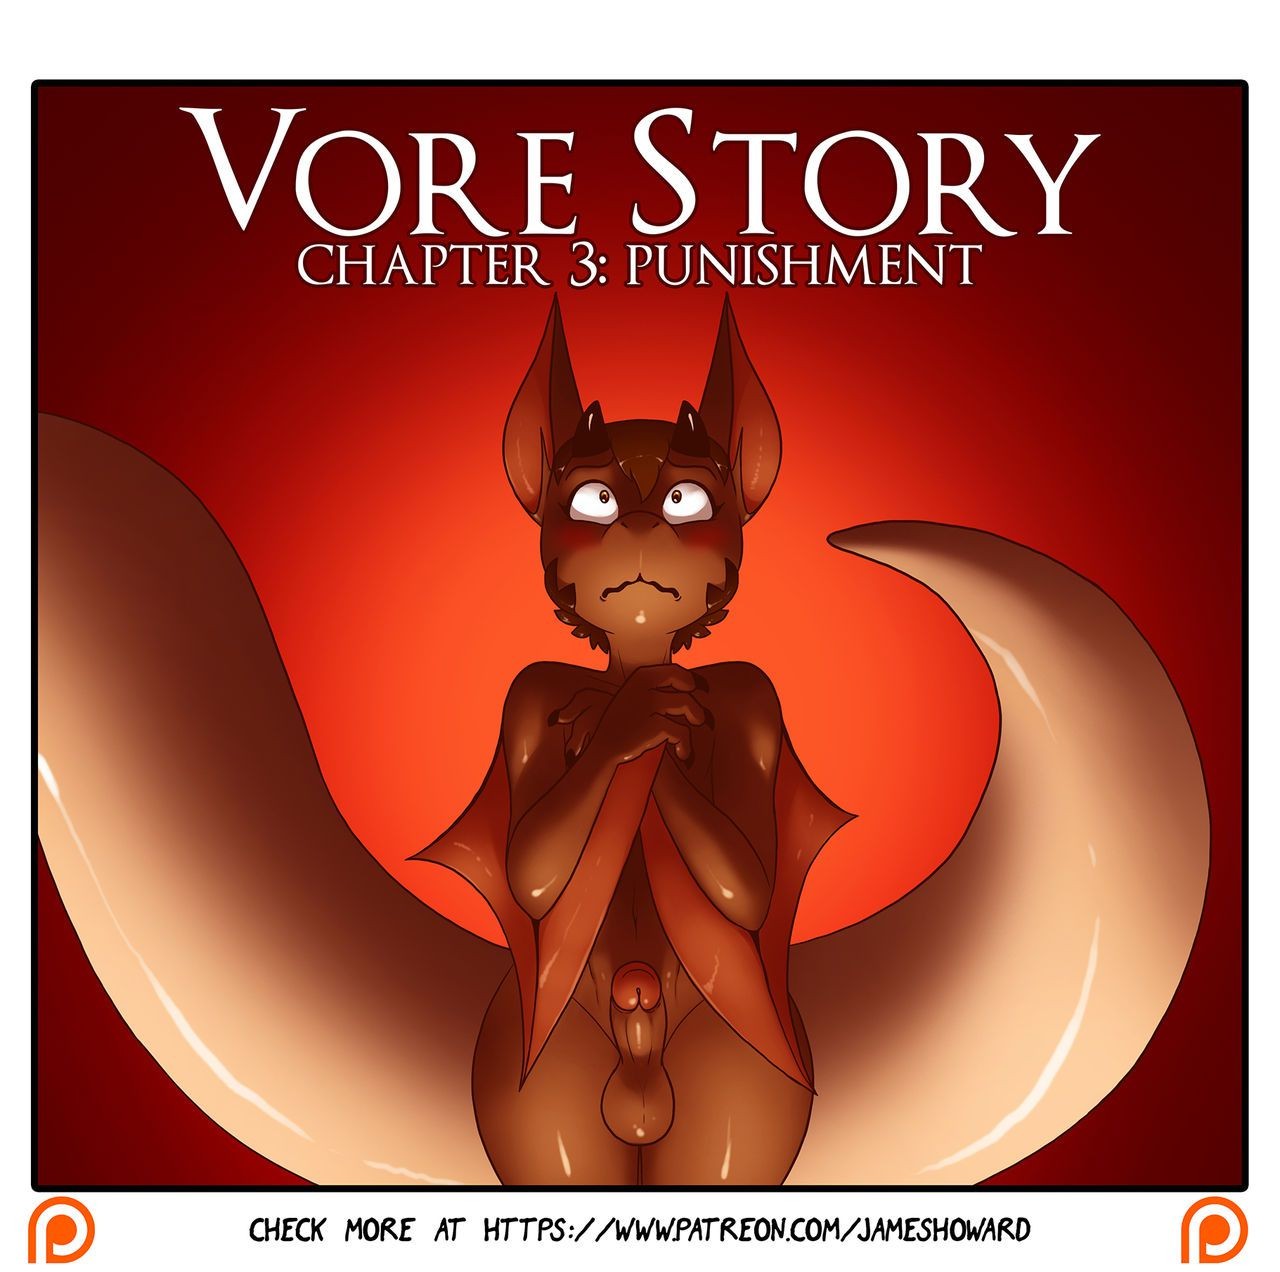 Music [James Howard] Vore Story Ch. 3: Punishment [Ongoing] Humiliation Pov